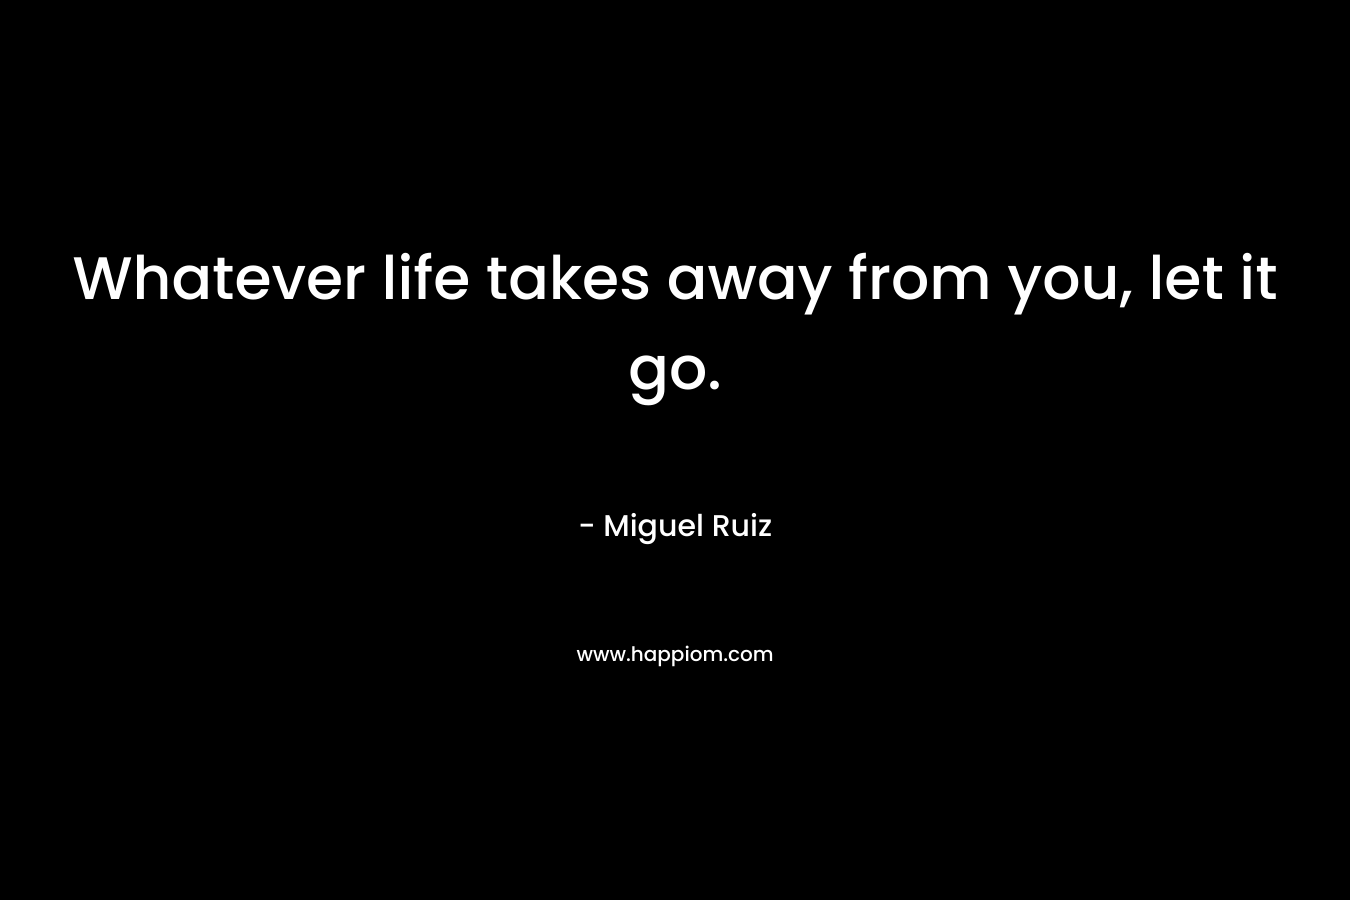 Whatever life takes away from you, let it go. – Miguel Ruiz